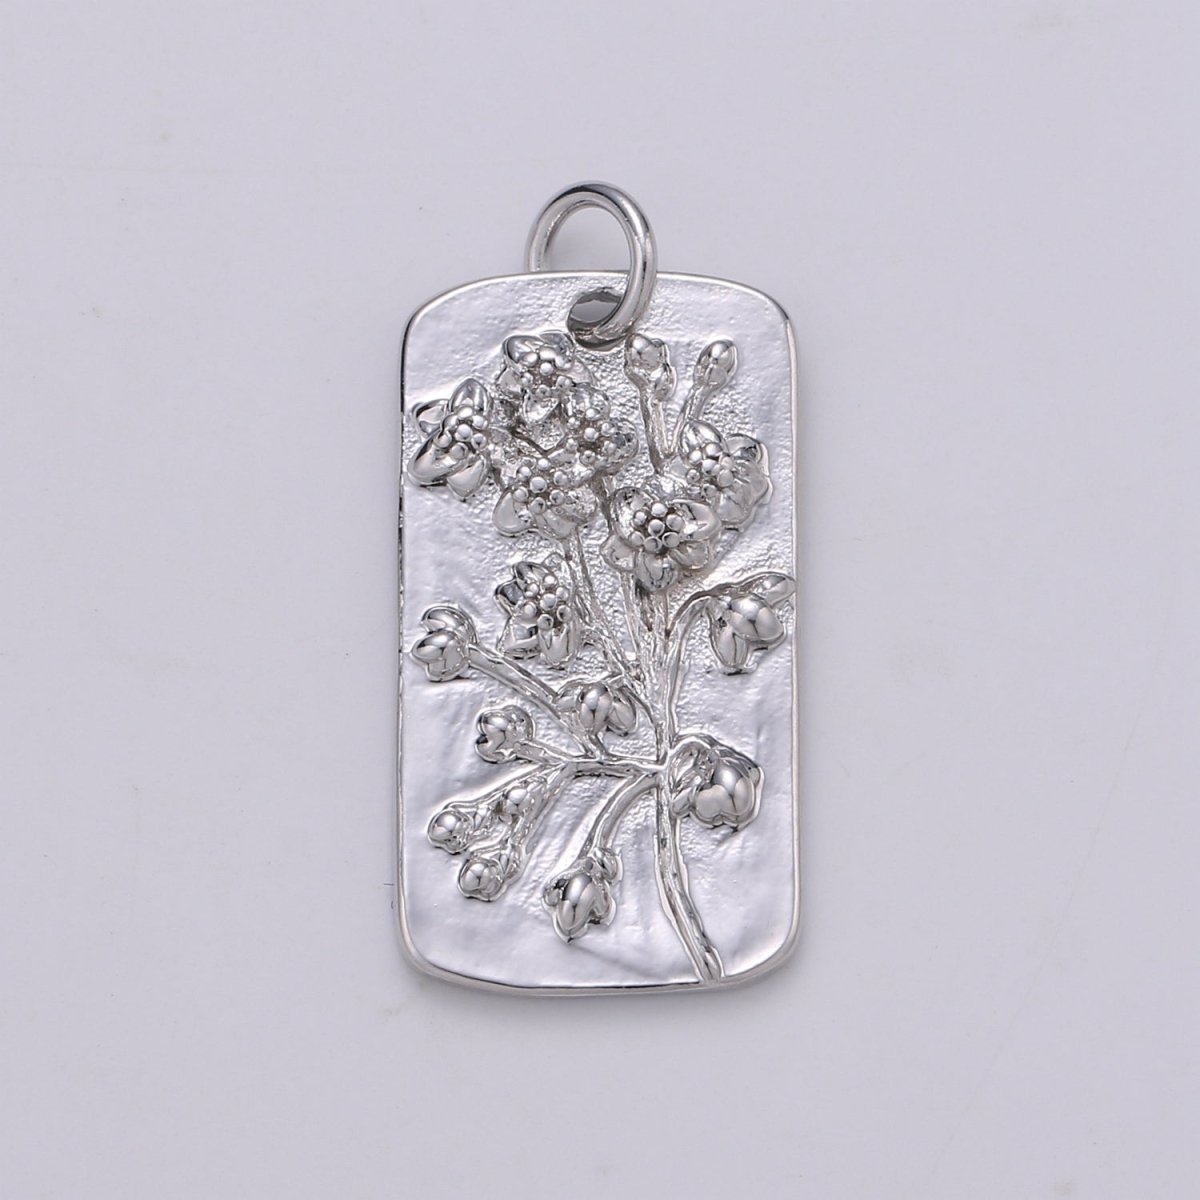 Silver Flower Charms, Wild Flower Pendant, Dainty Flower Charm, Small SunFlower Daisy, Hibiscus Charm for Necklace Floral Flower Jewelry D-844 TO D-852 - DLUXCA